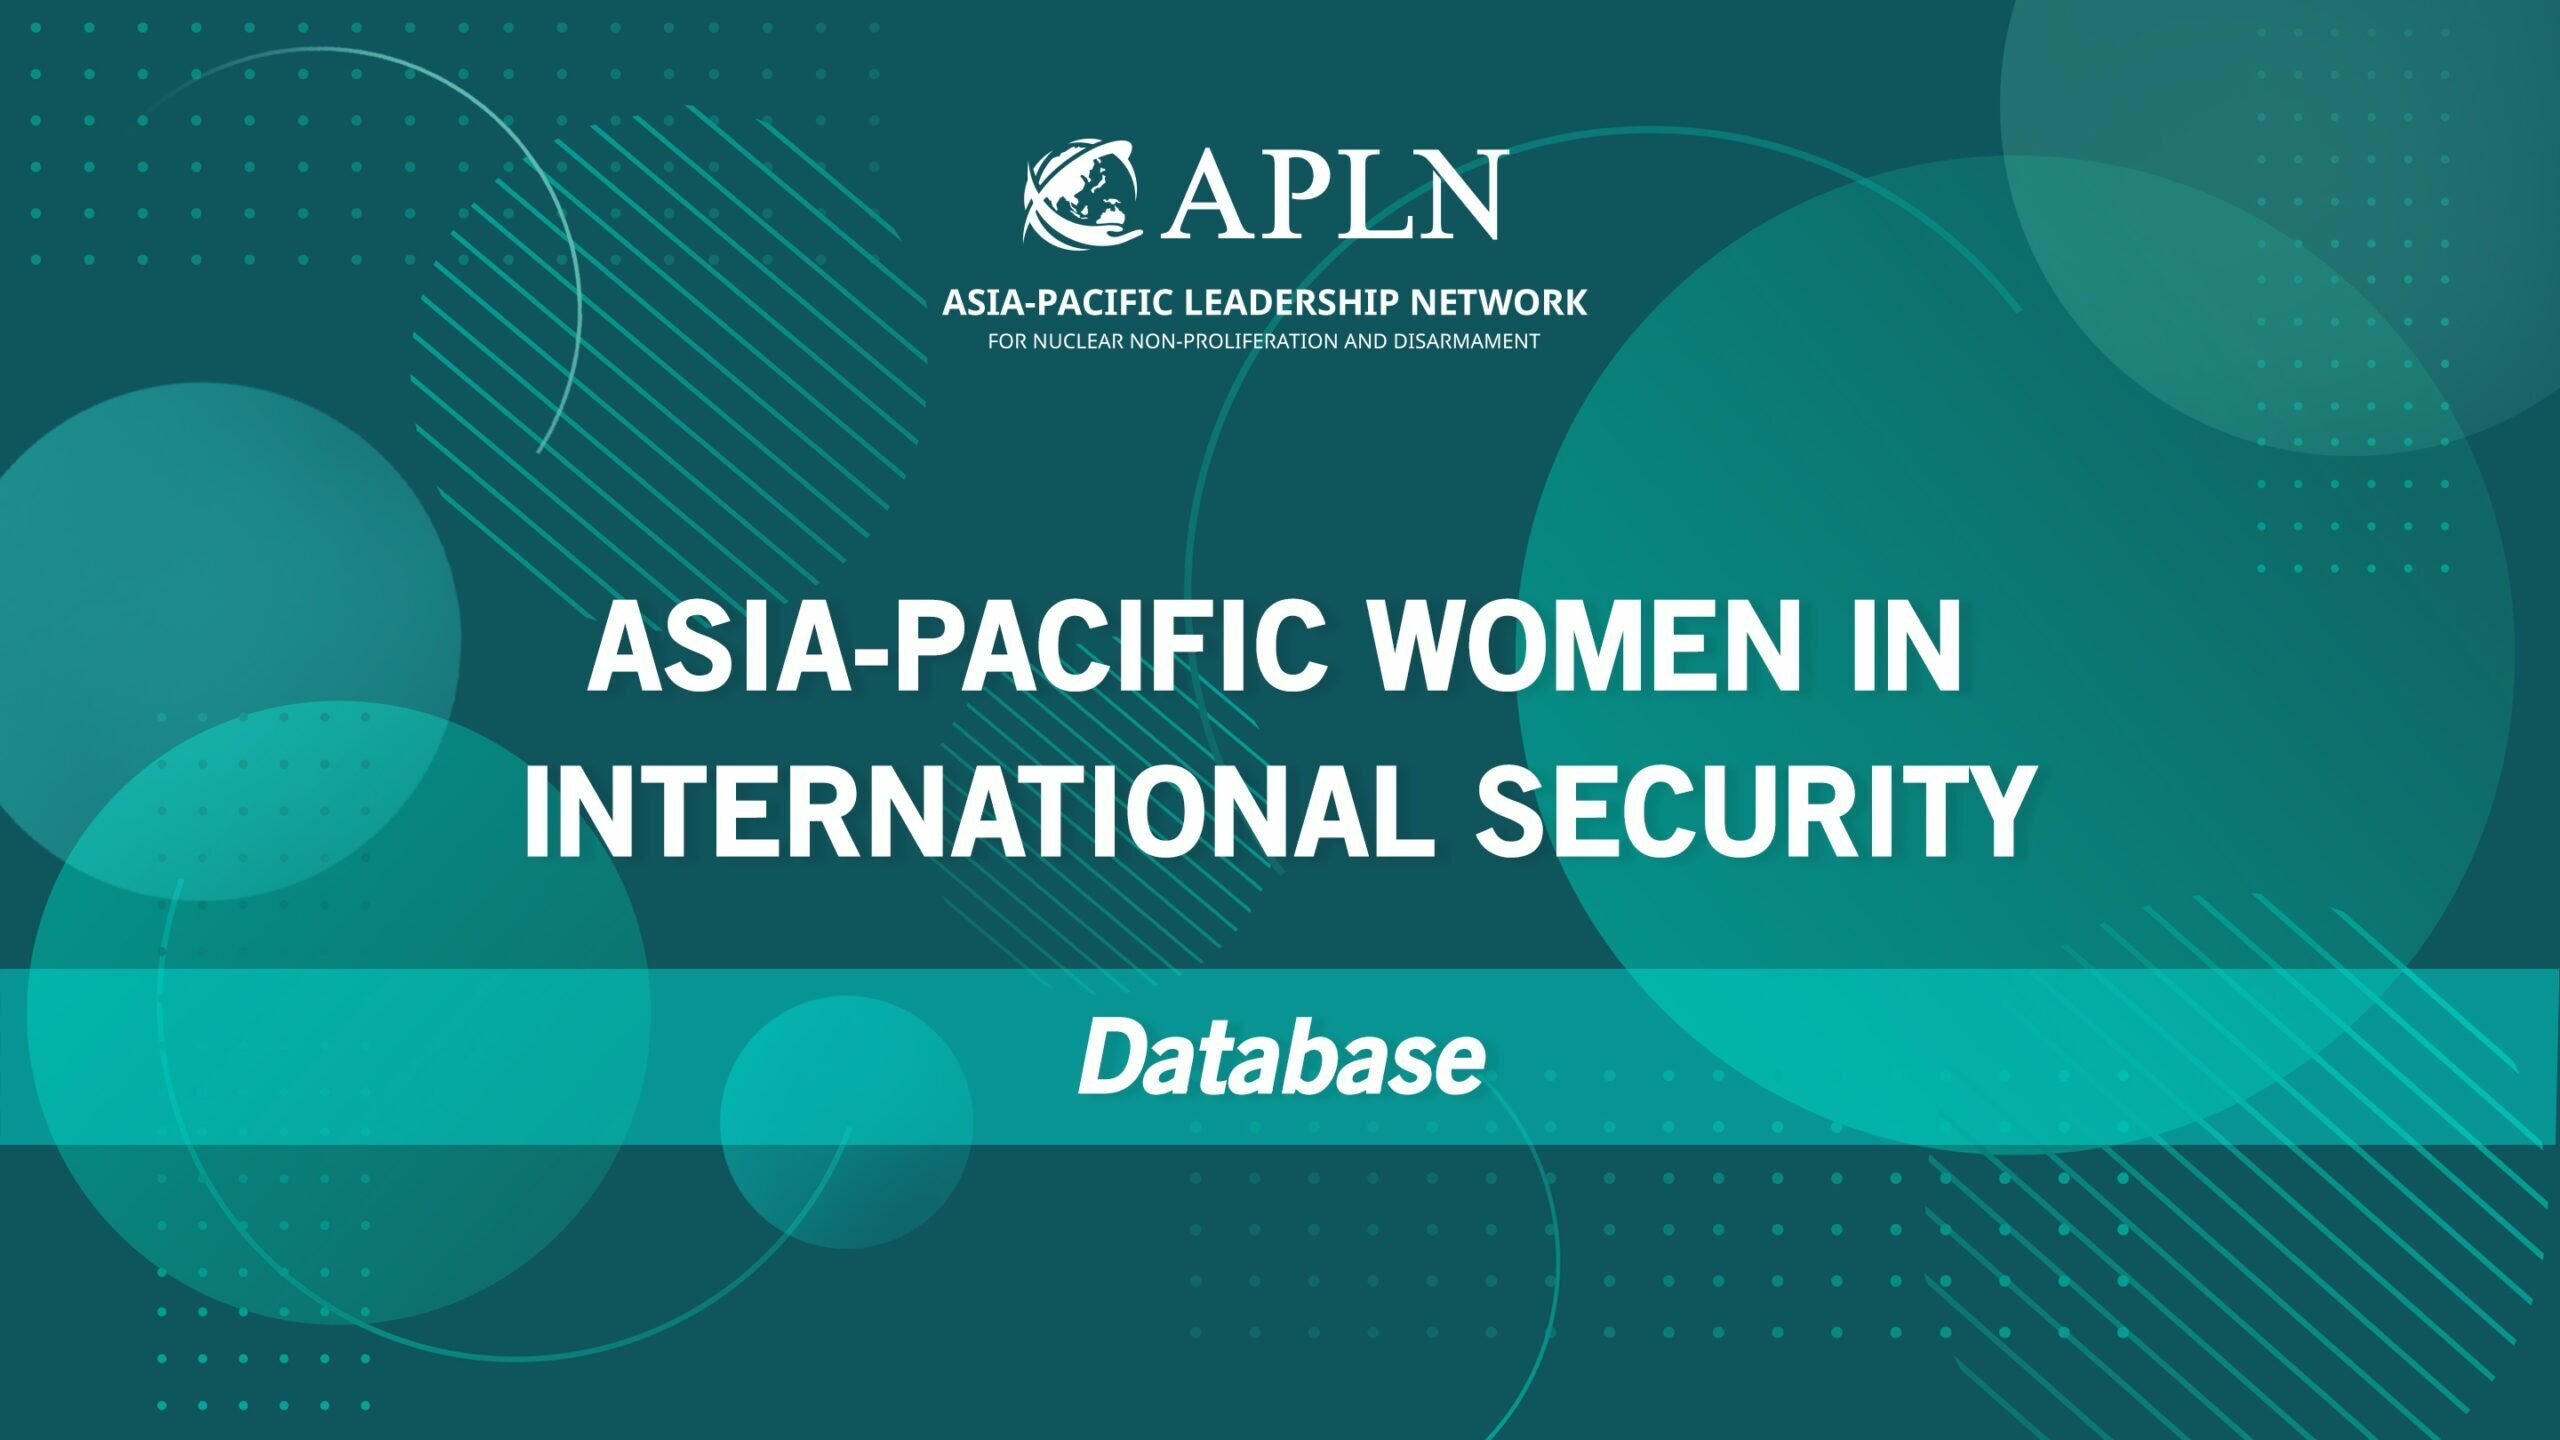 [LAUNCH] Asia-Pacific Women in International Security Database